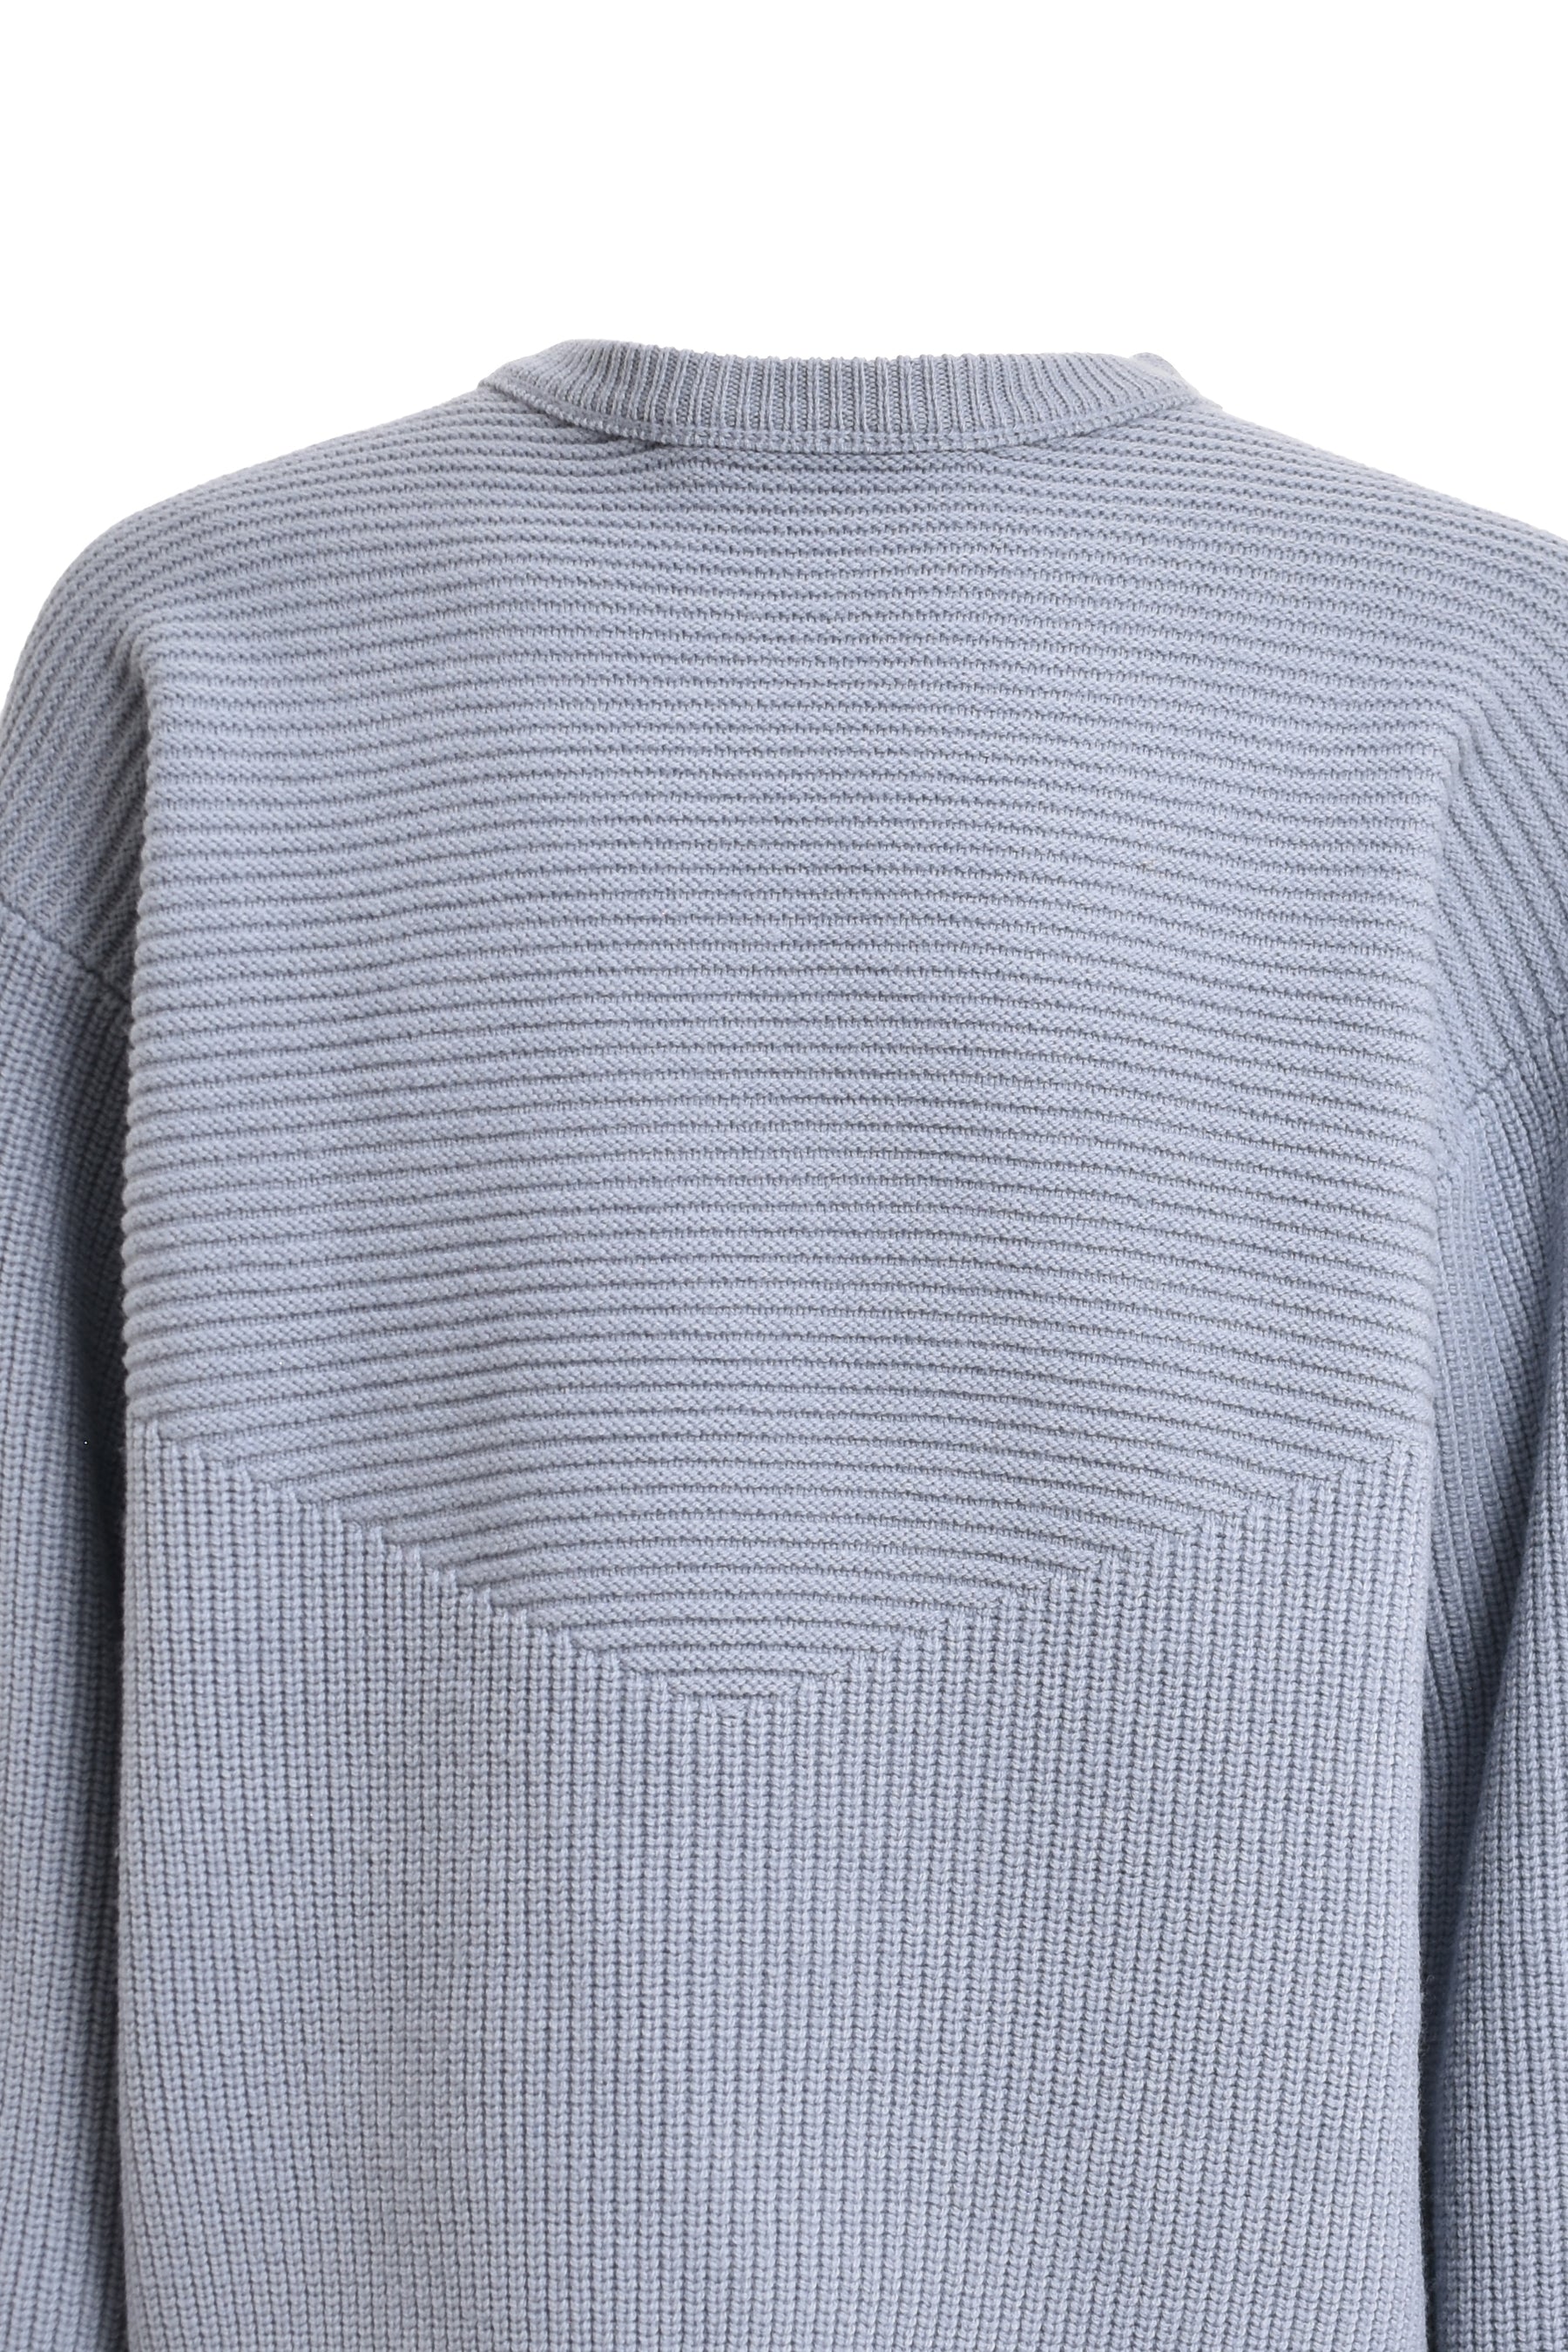 ROUTE KNIT SWEATER / DUST